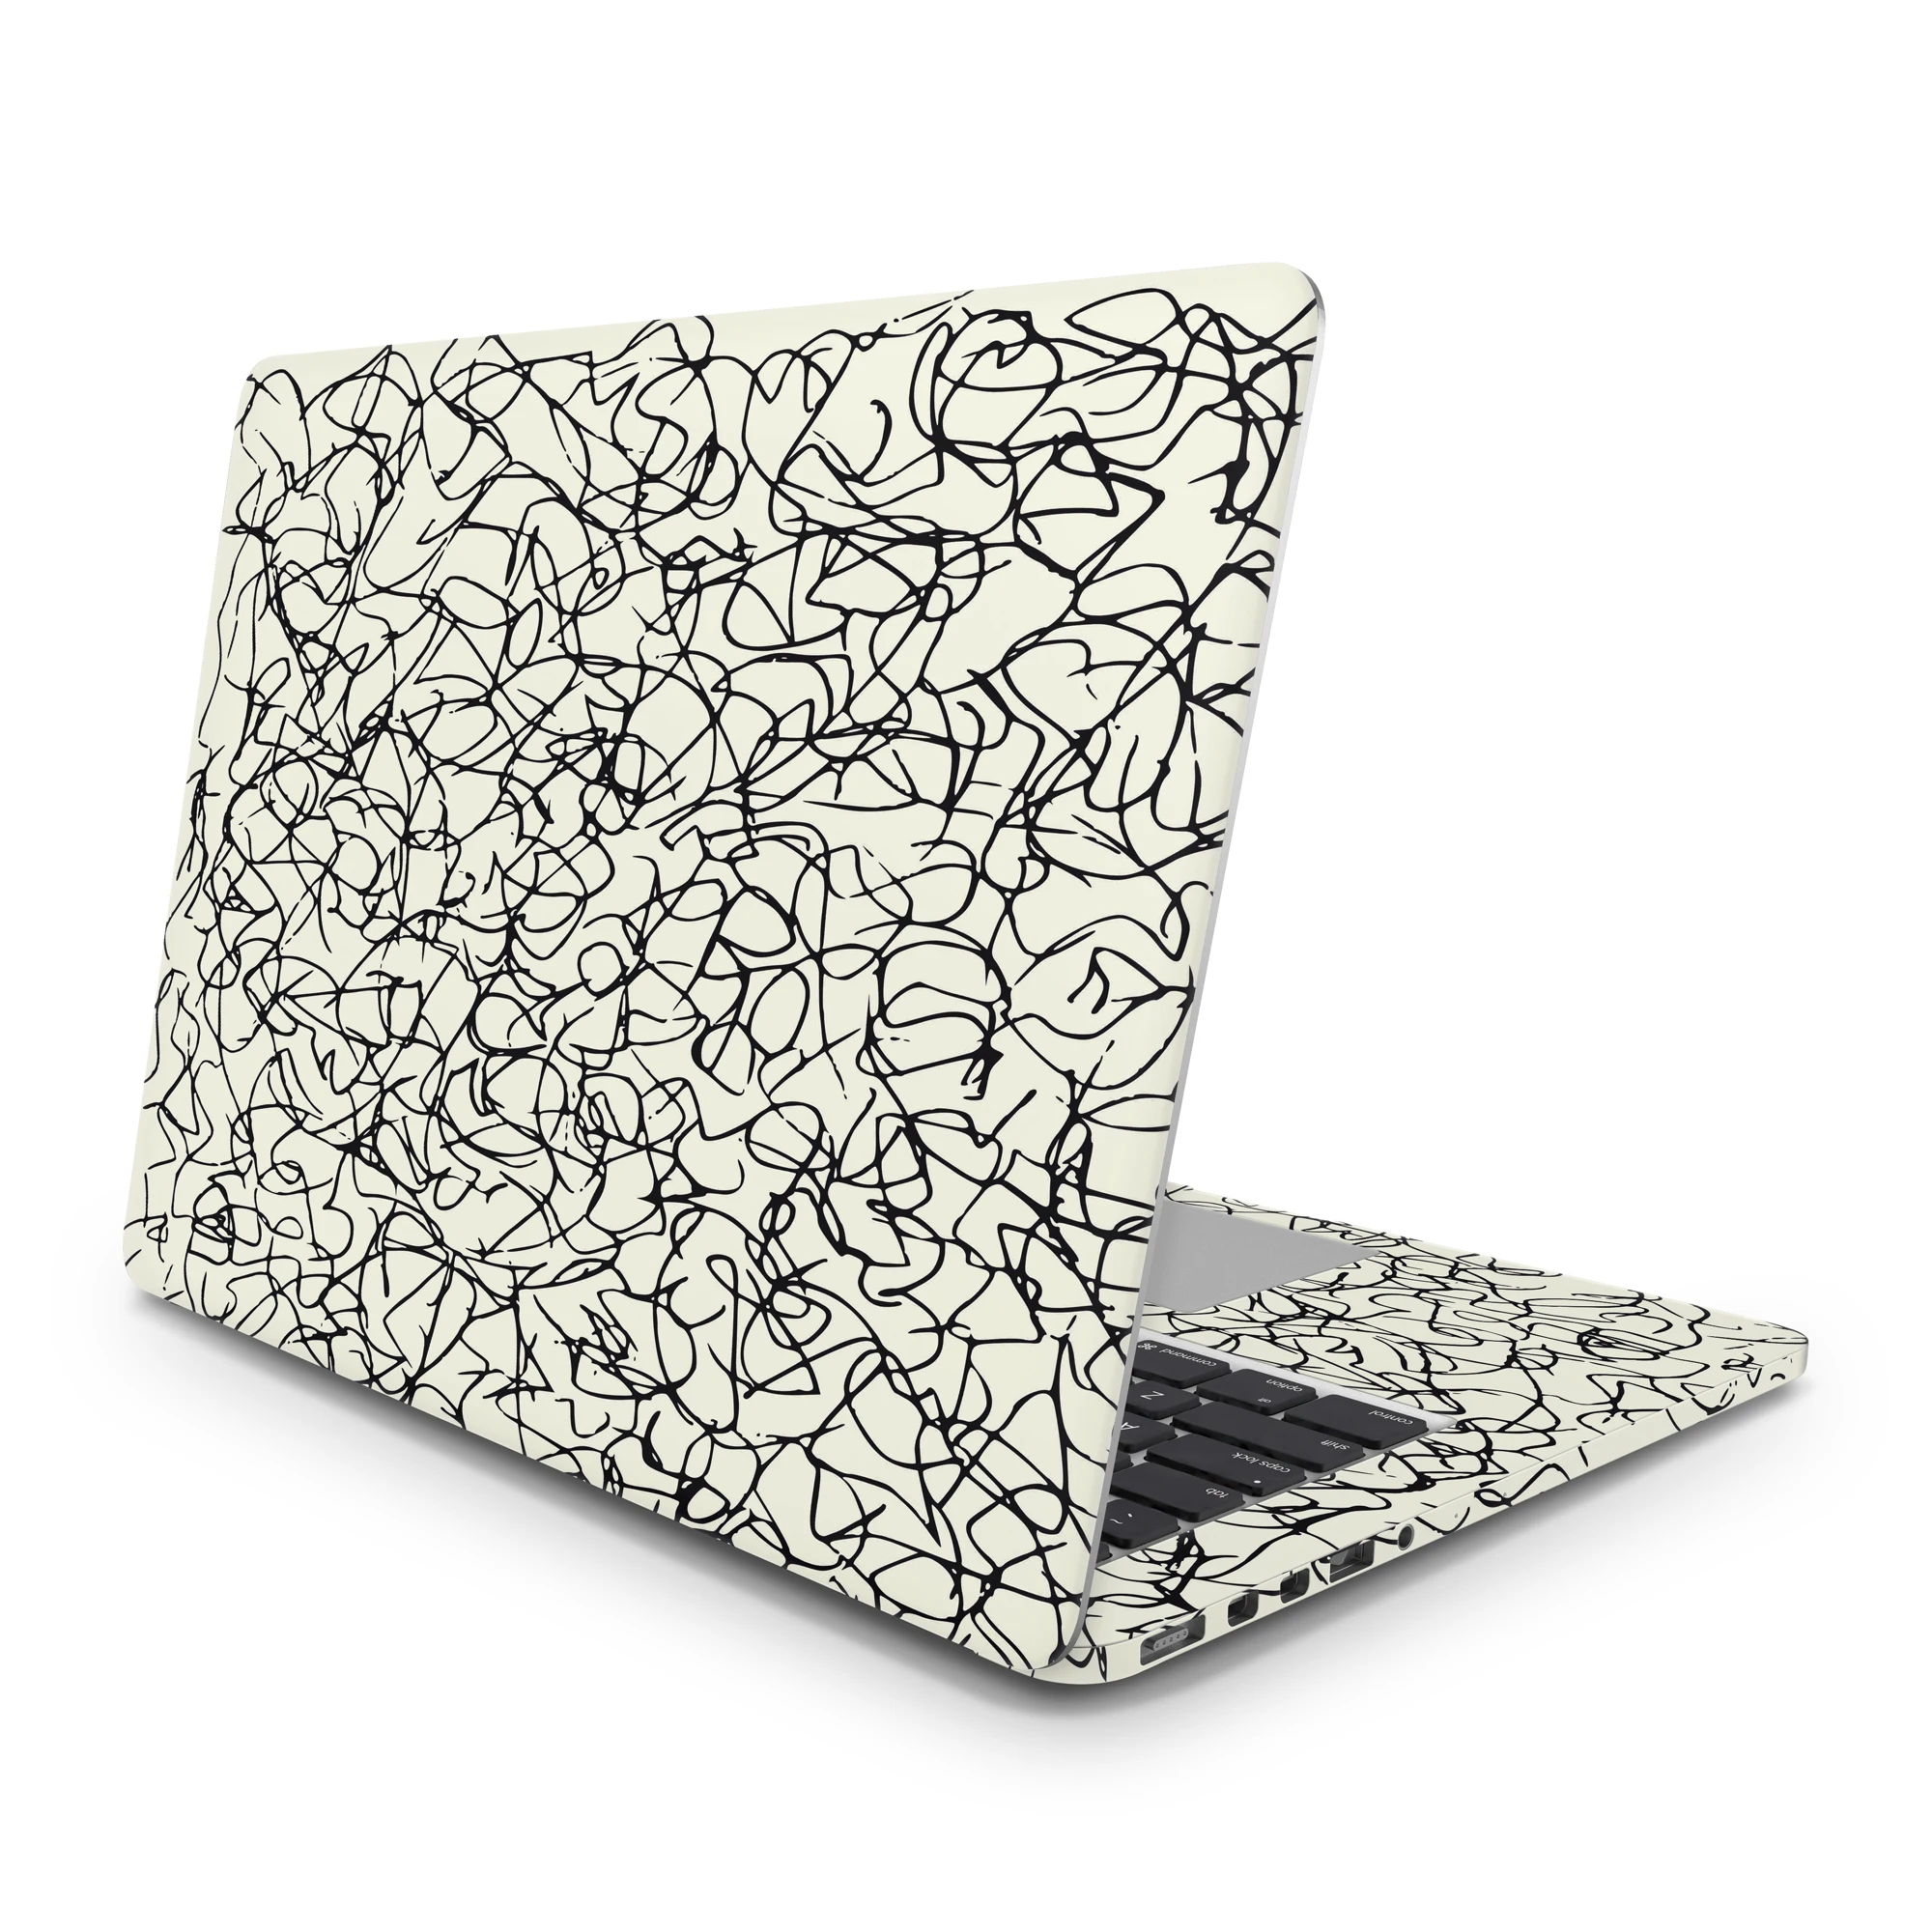 

Sticker Master Texturas 1 Laptop Vinyl Sticker Skin Cover For 10 12 13 14 15.4 15.6 16 17 19 " Inc Notebook Decal For Macbook,Asus,Acer,Hp,Lenovo,Huawei,Dell,Msi,Apple,Toshiba,Compaq